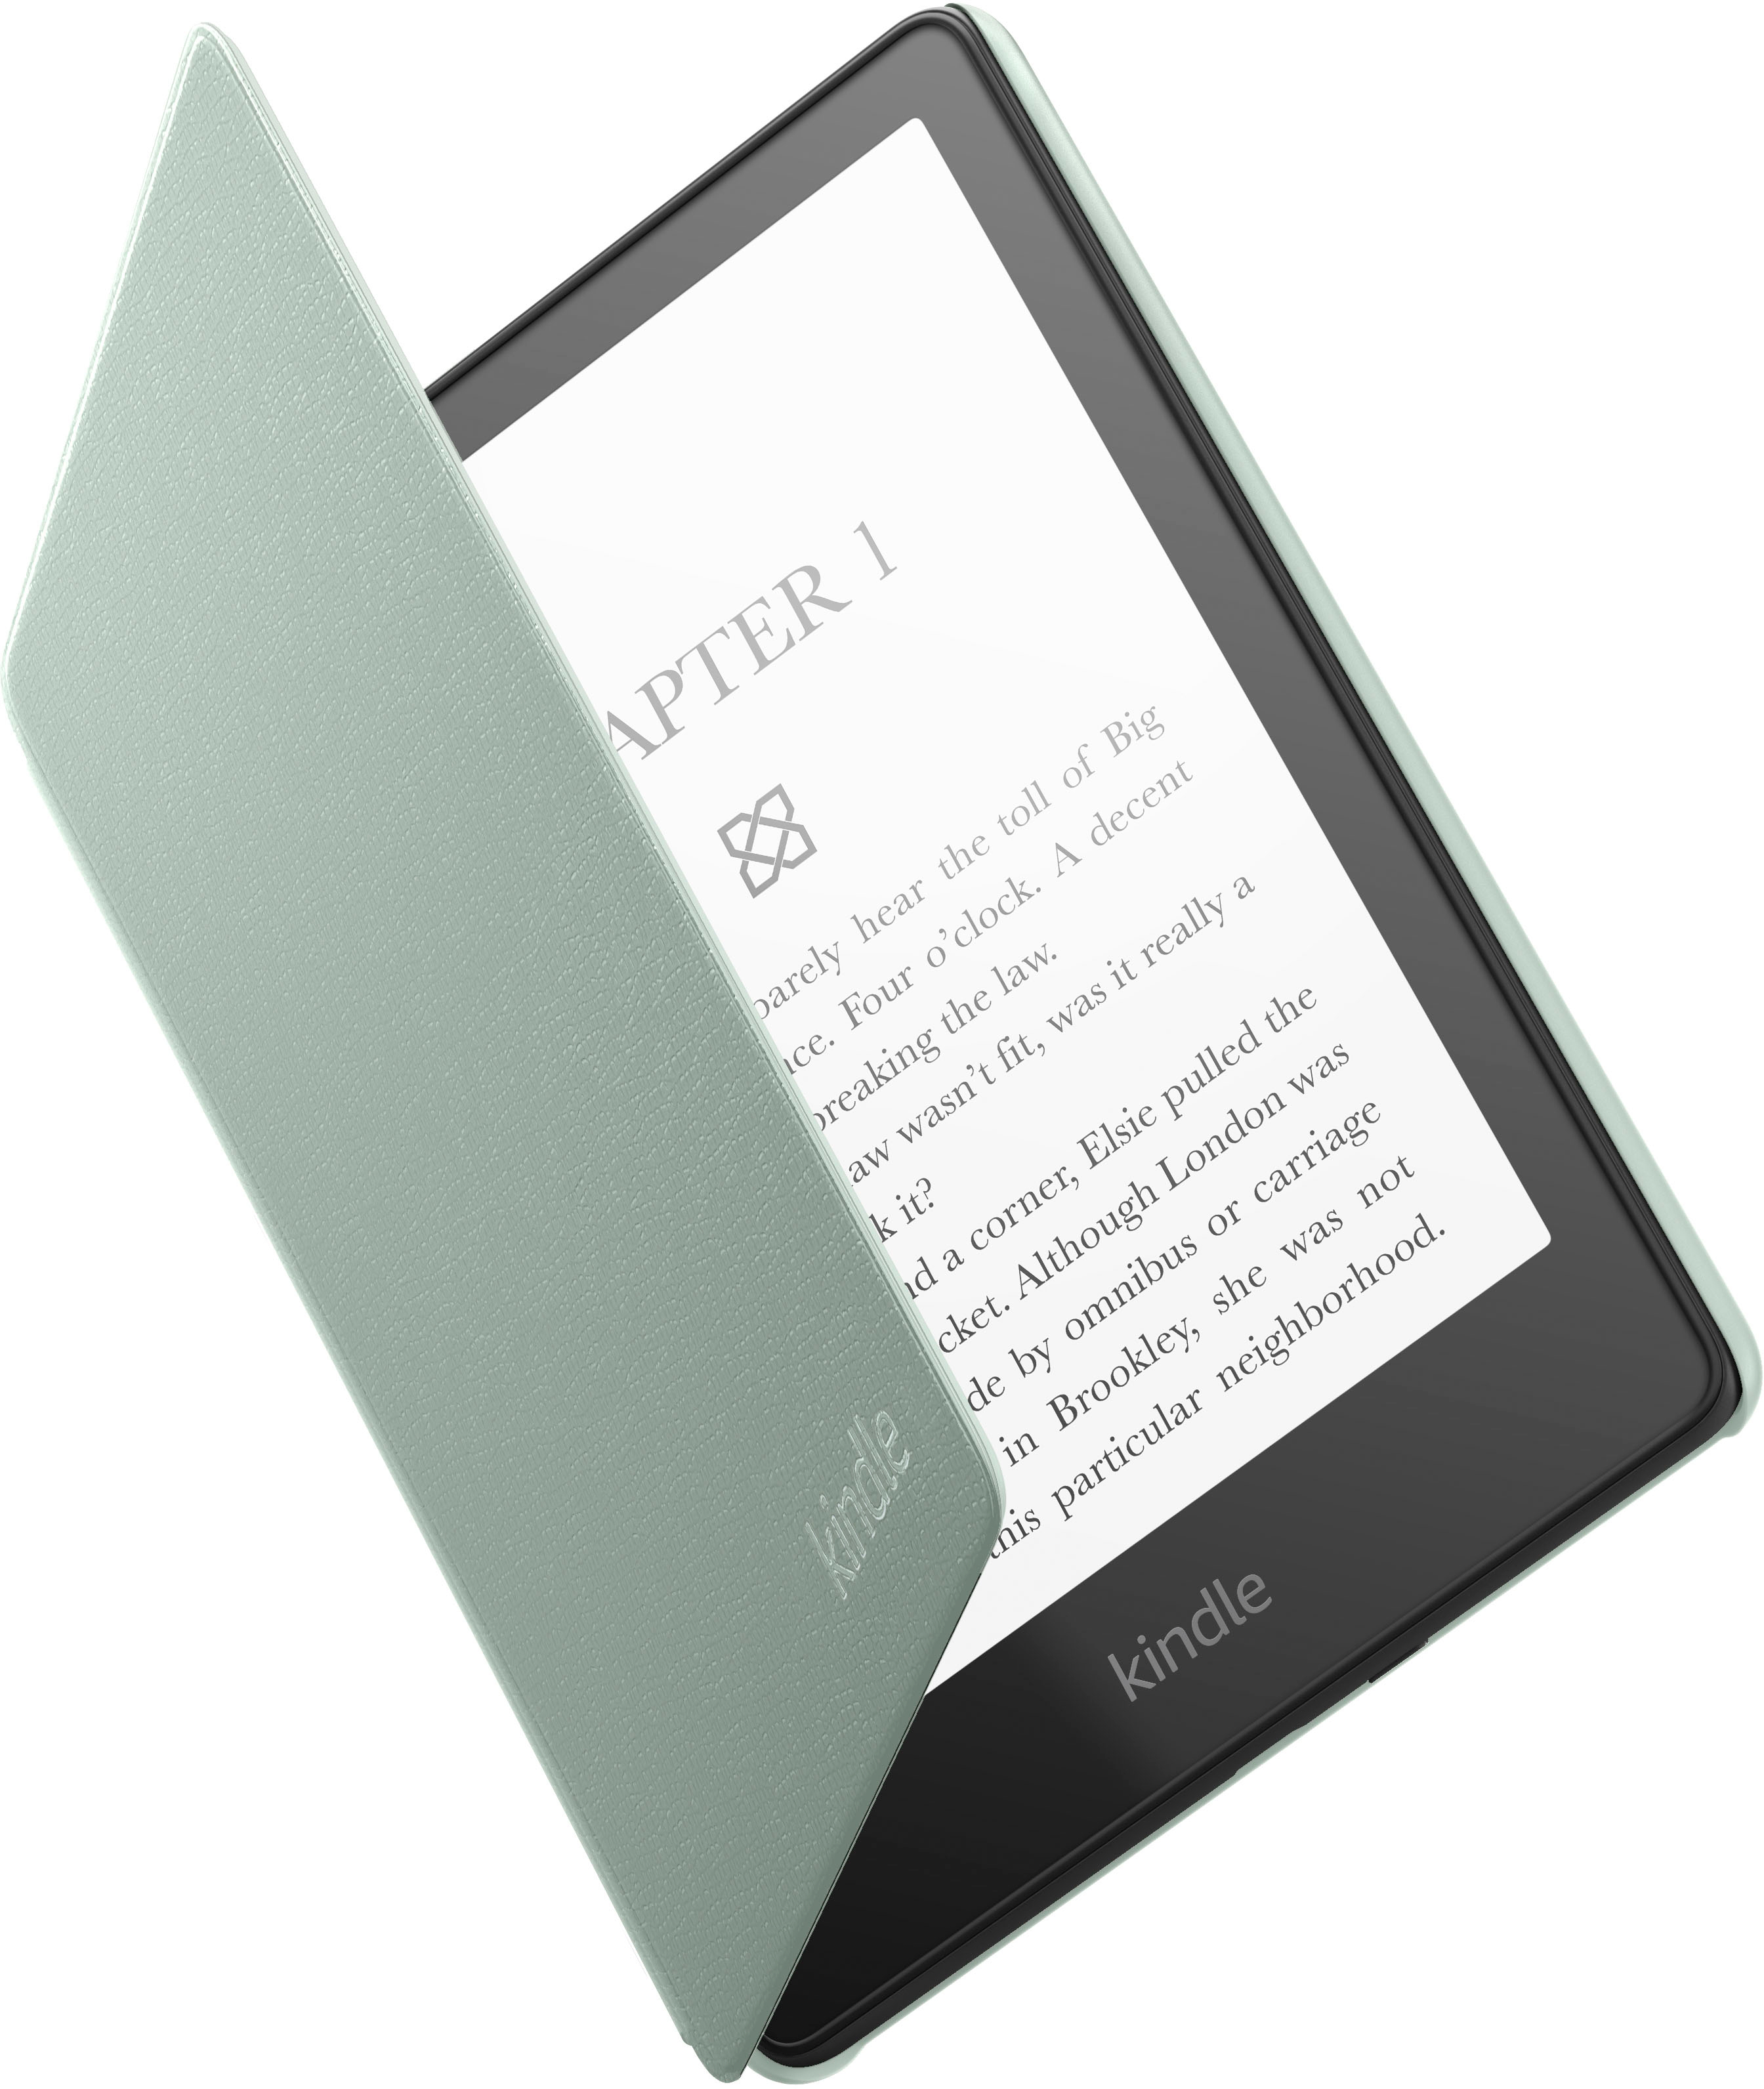 Kindle Paperwhite now comes in Agave Green and Denim, prices are